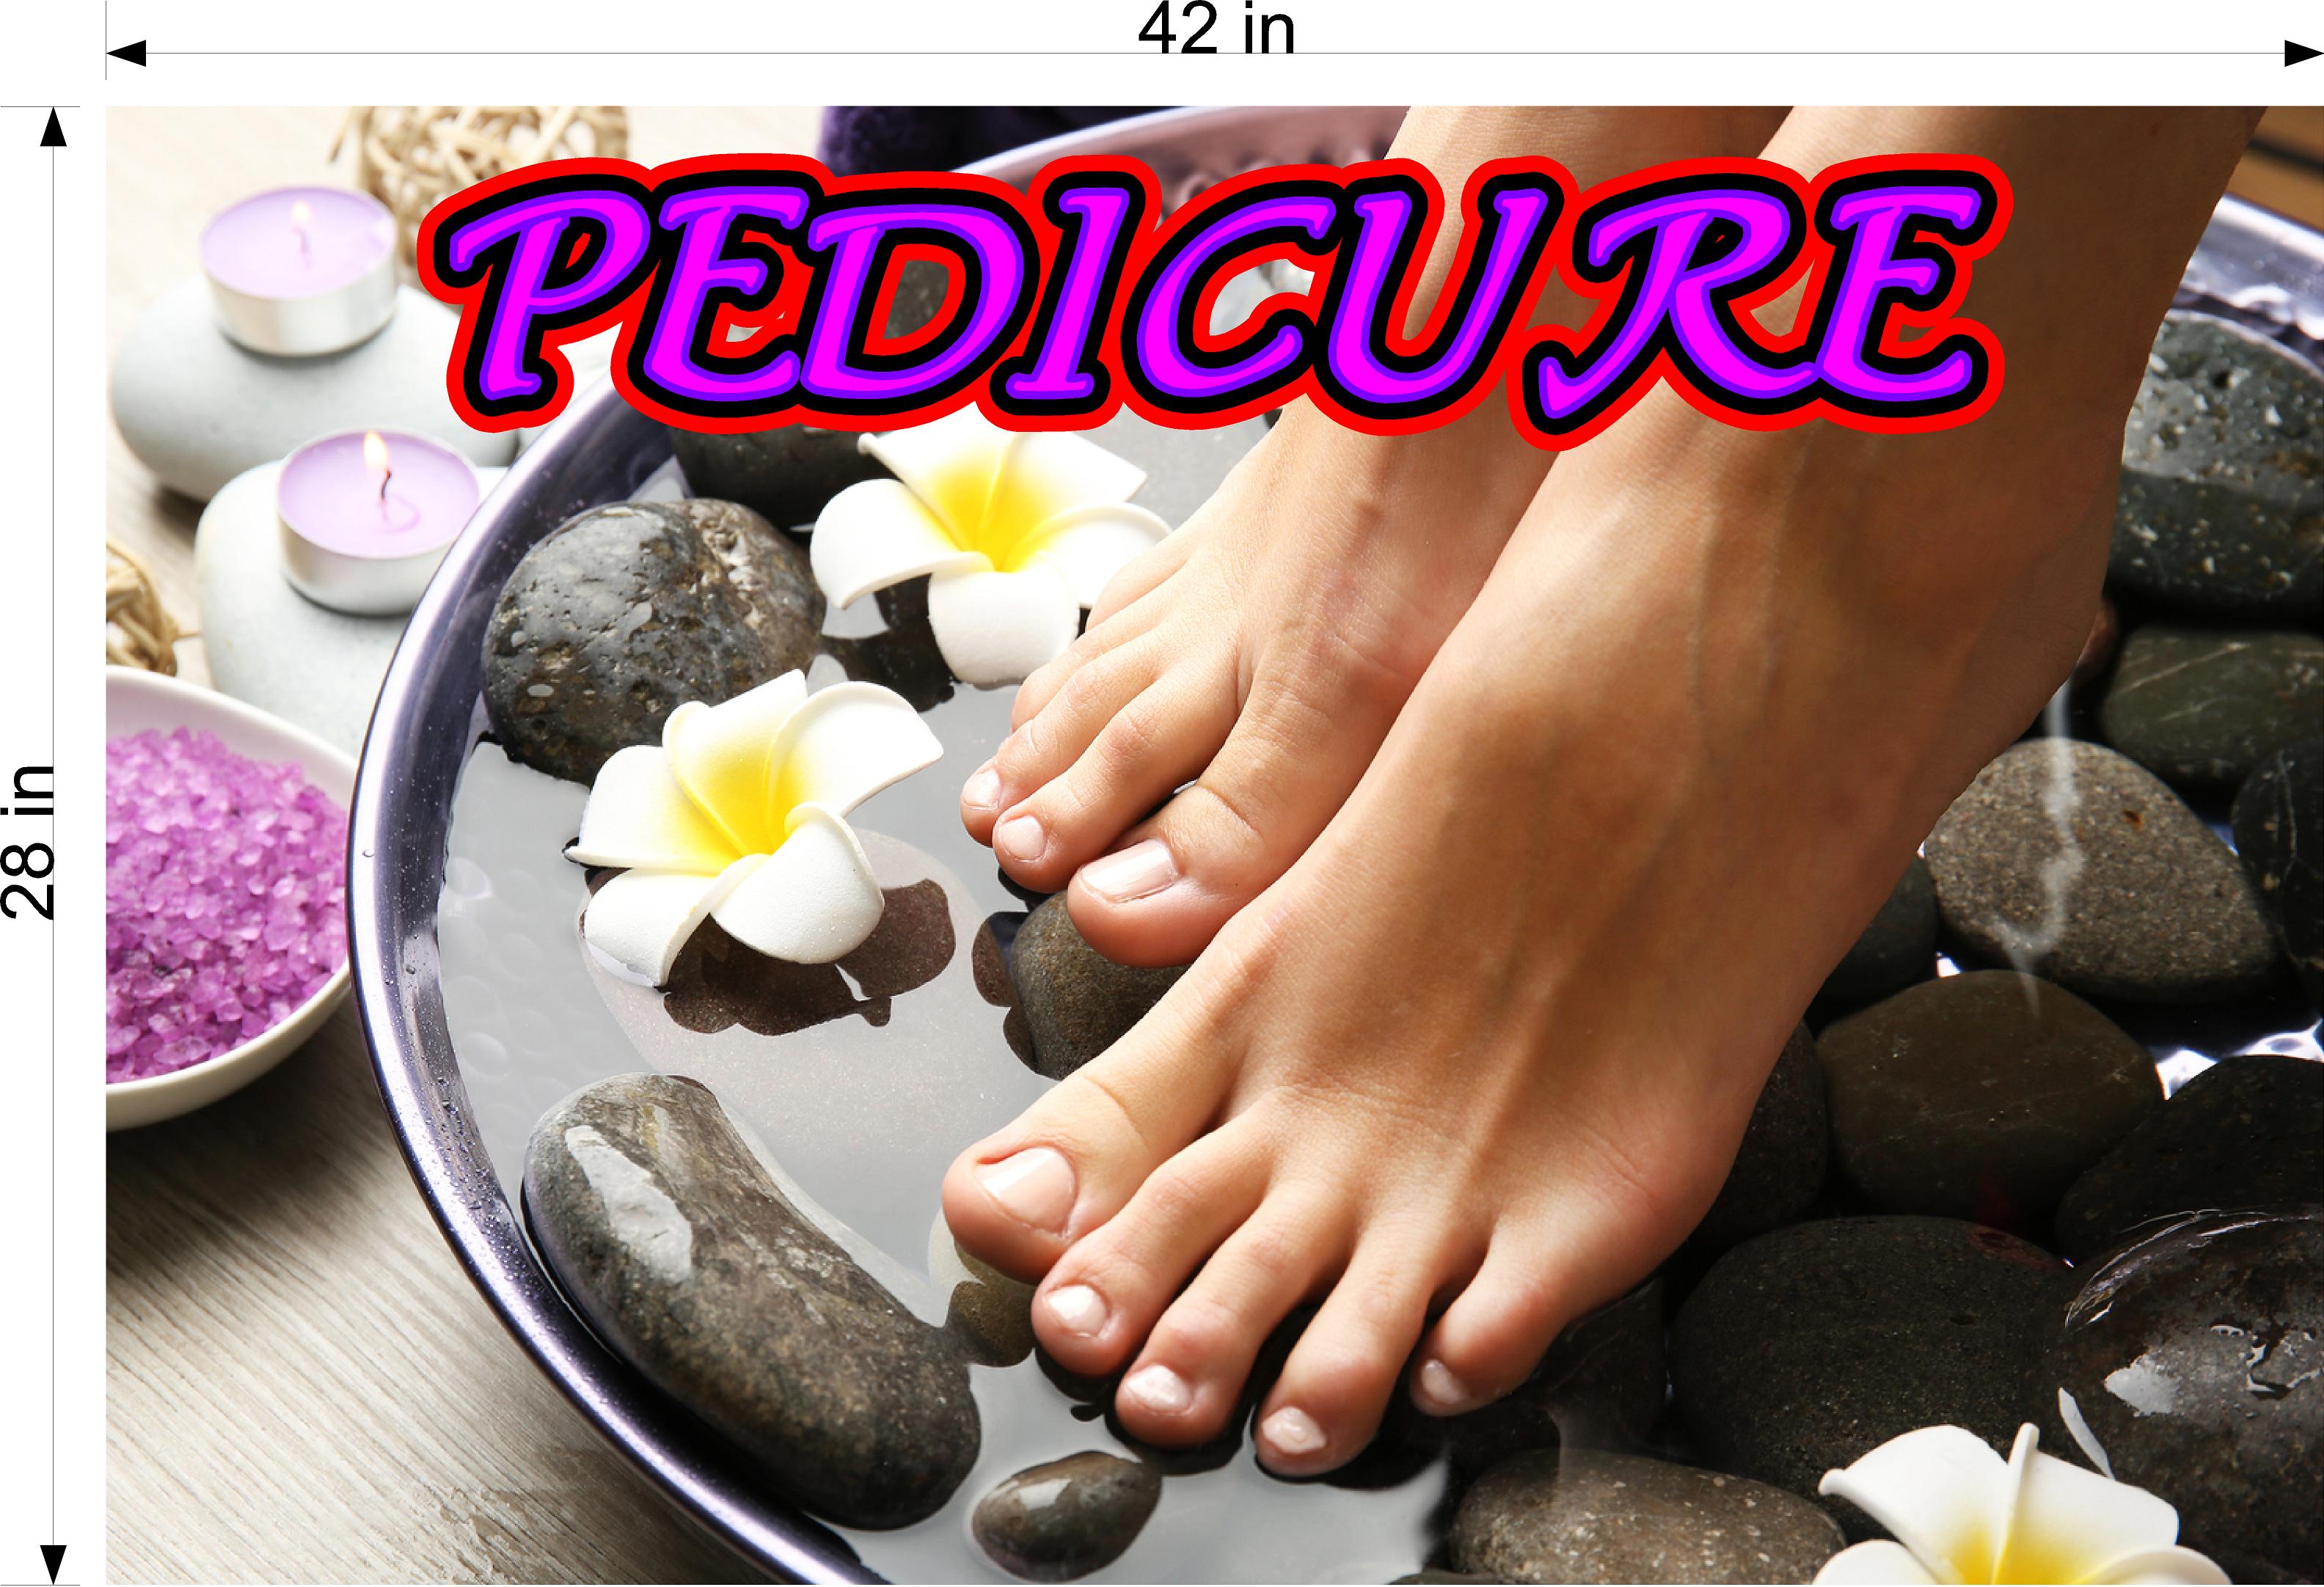 Pedicure 03 Wallpaper Poster Decal with Adhesive Backing Wall Sticker Decor Indoors Interior Sign Horizontal